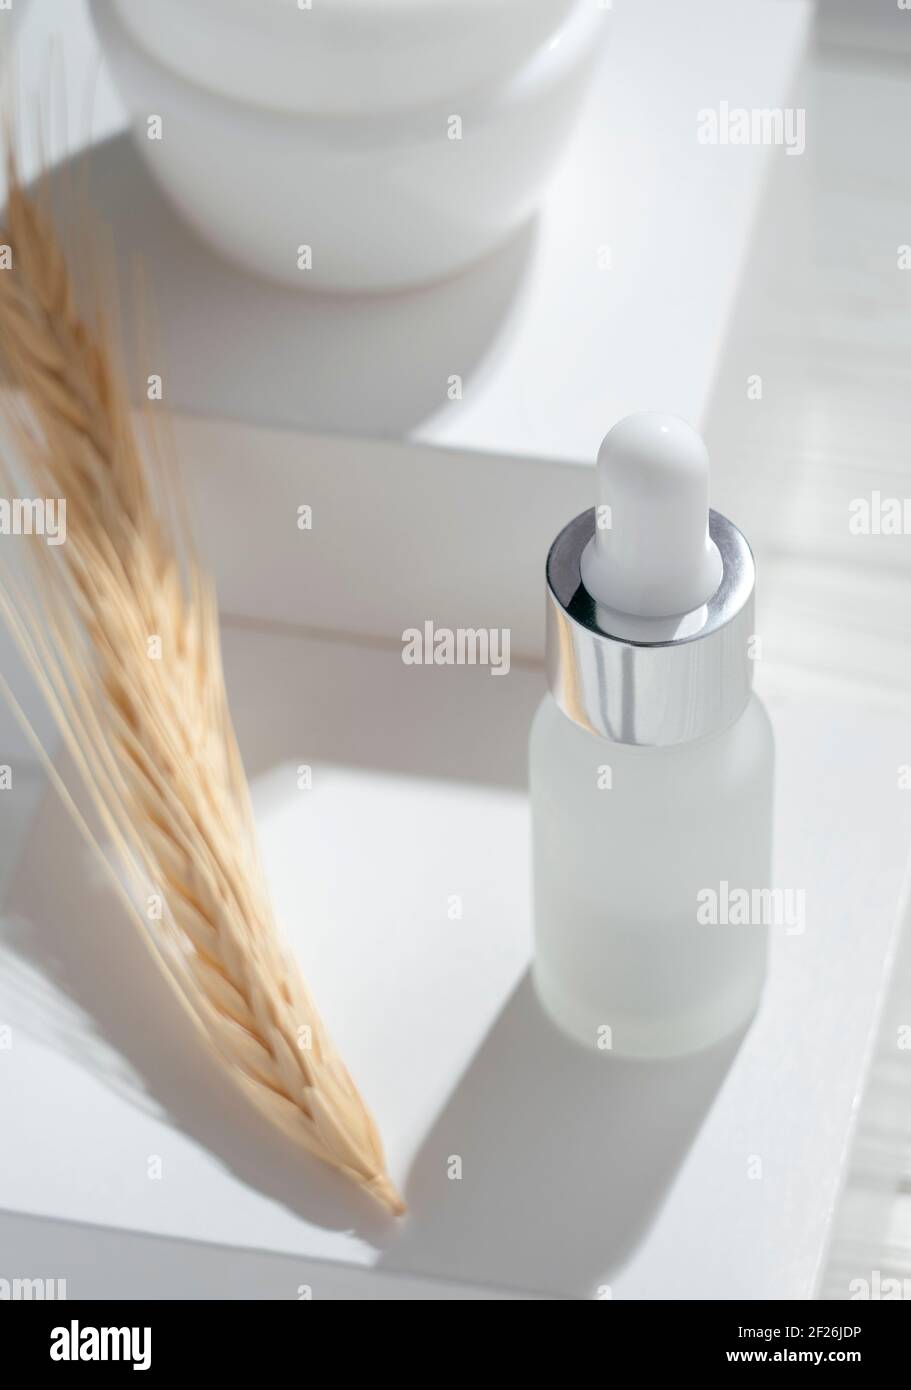 Top view of Pipet bottle and cream container on white boxes Stock Photo